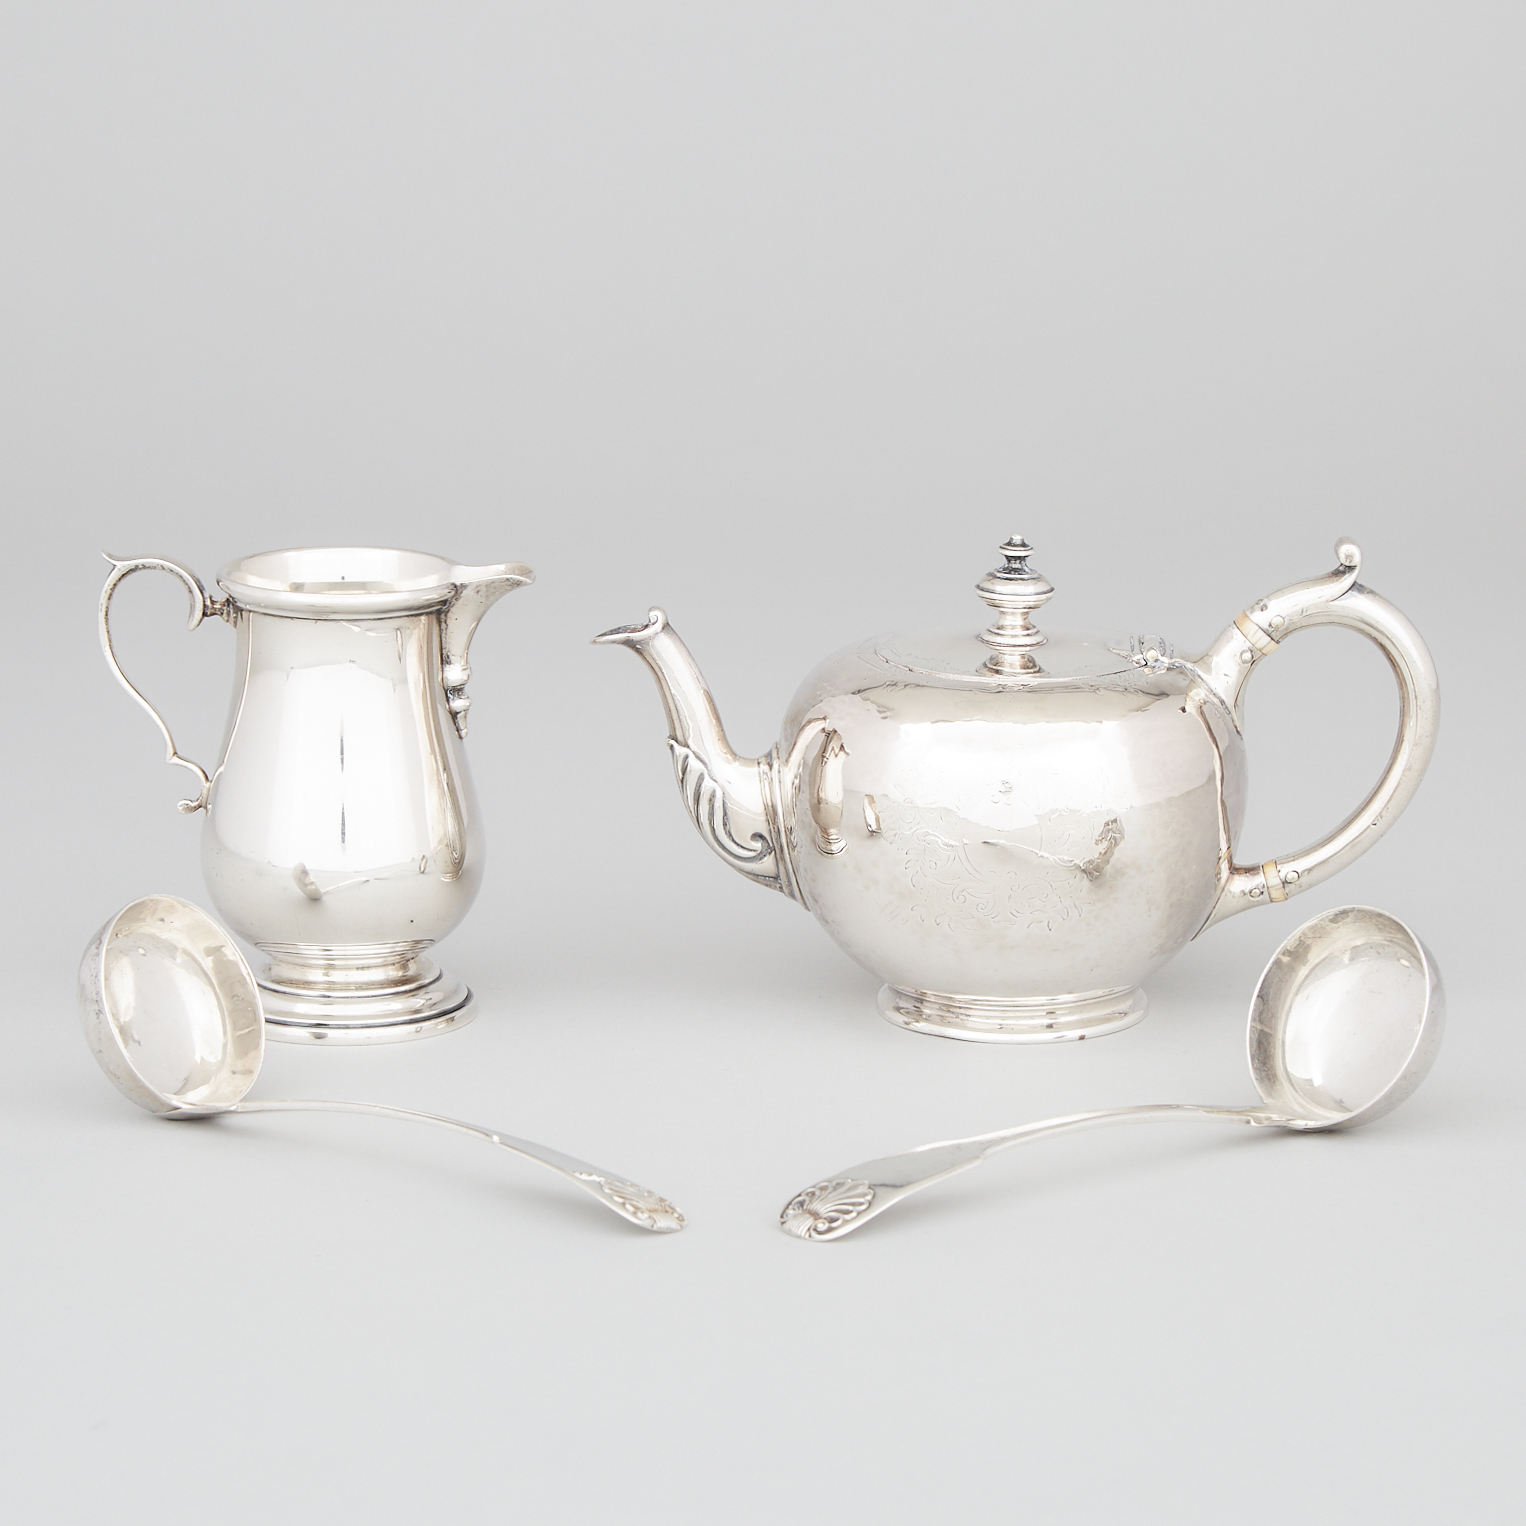 Victorian Silver Small Teapot, John Wilmin Figg, 1854, Pair of William IV Scottish Fiddle and Shell Sauce Ladles, James McKay, 1833, and a Canadian Cream Jug, Henry Birks & Sons, 1958